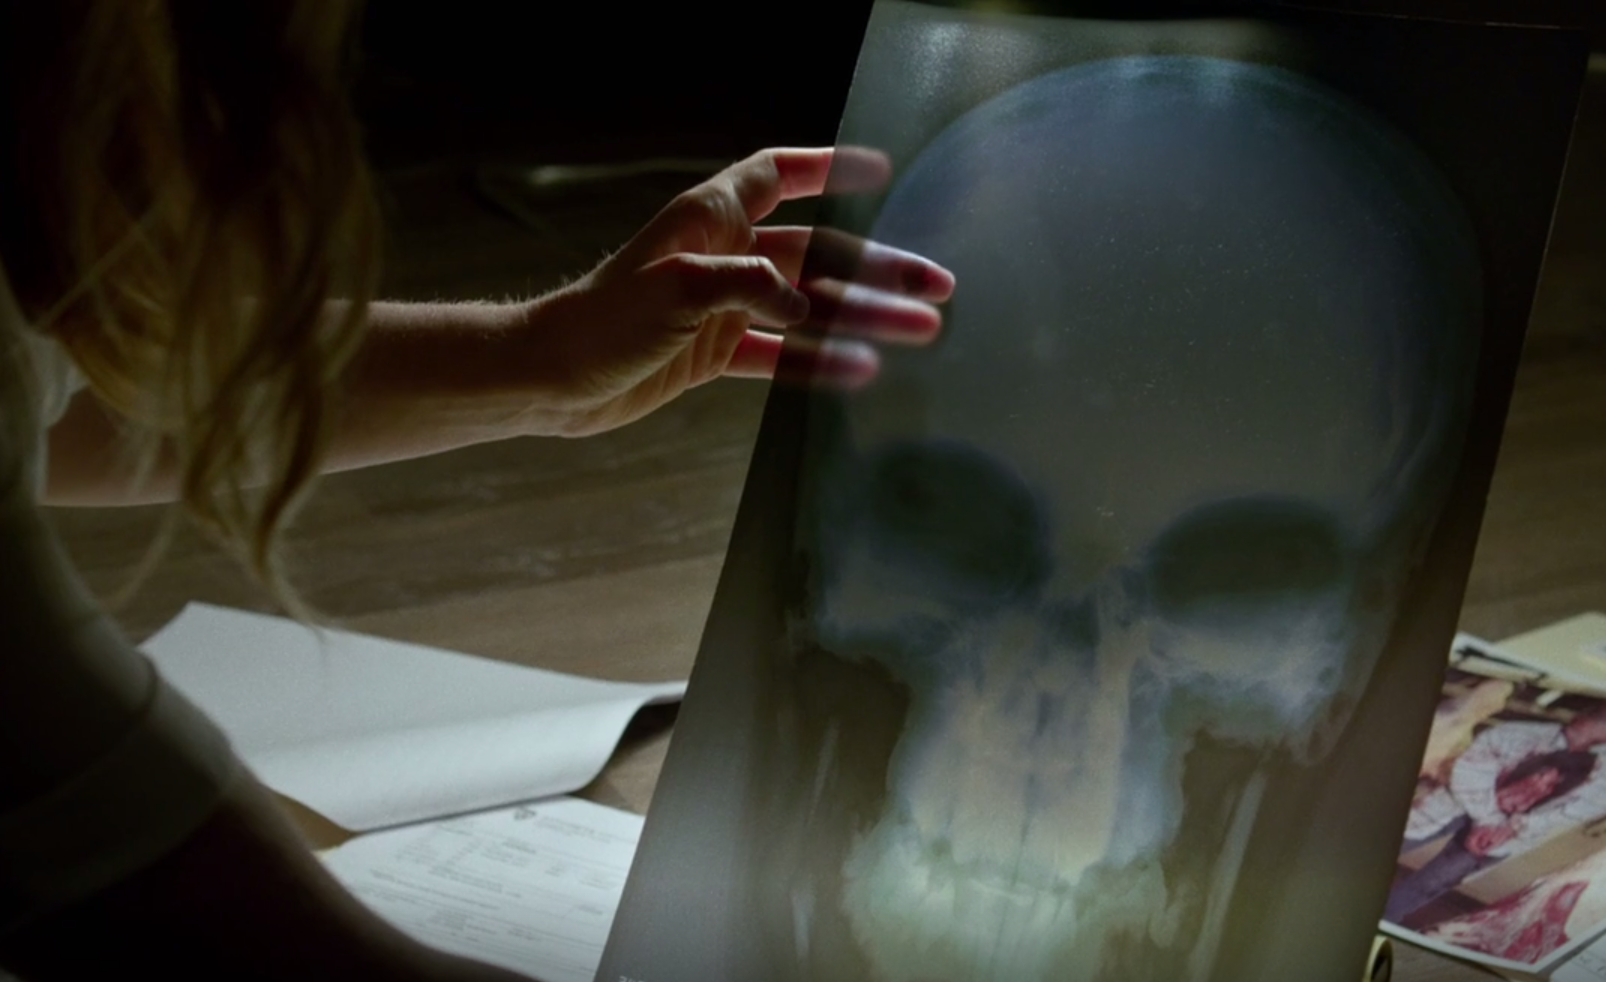 A shot hinting at The Punisher from Daredevil Season 2 teaser trailer